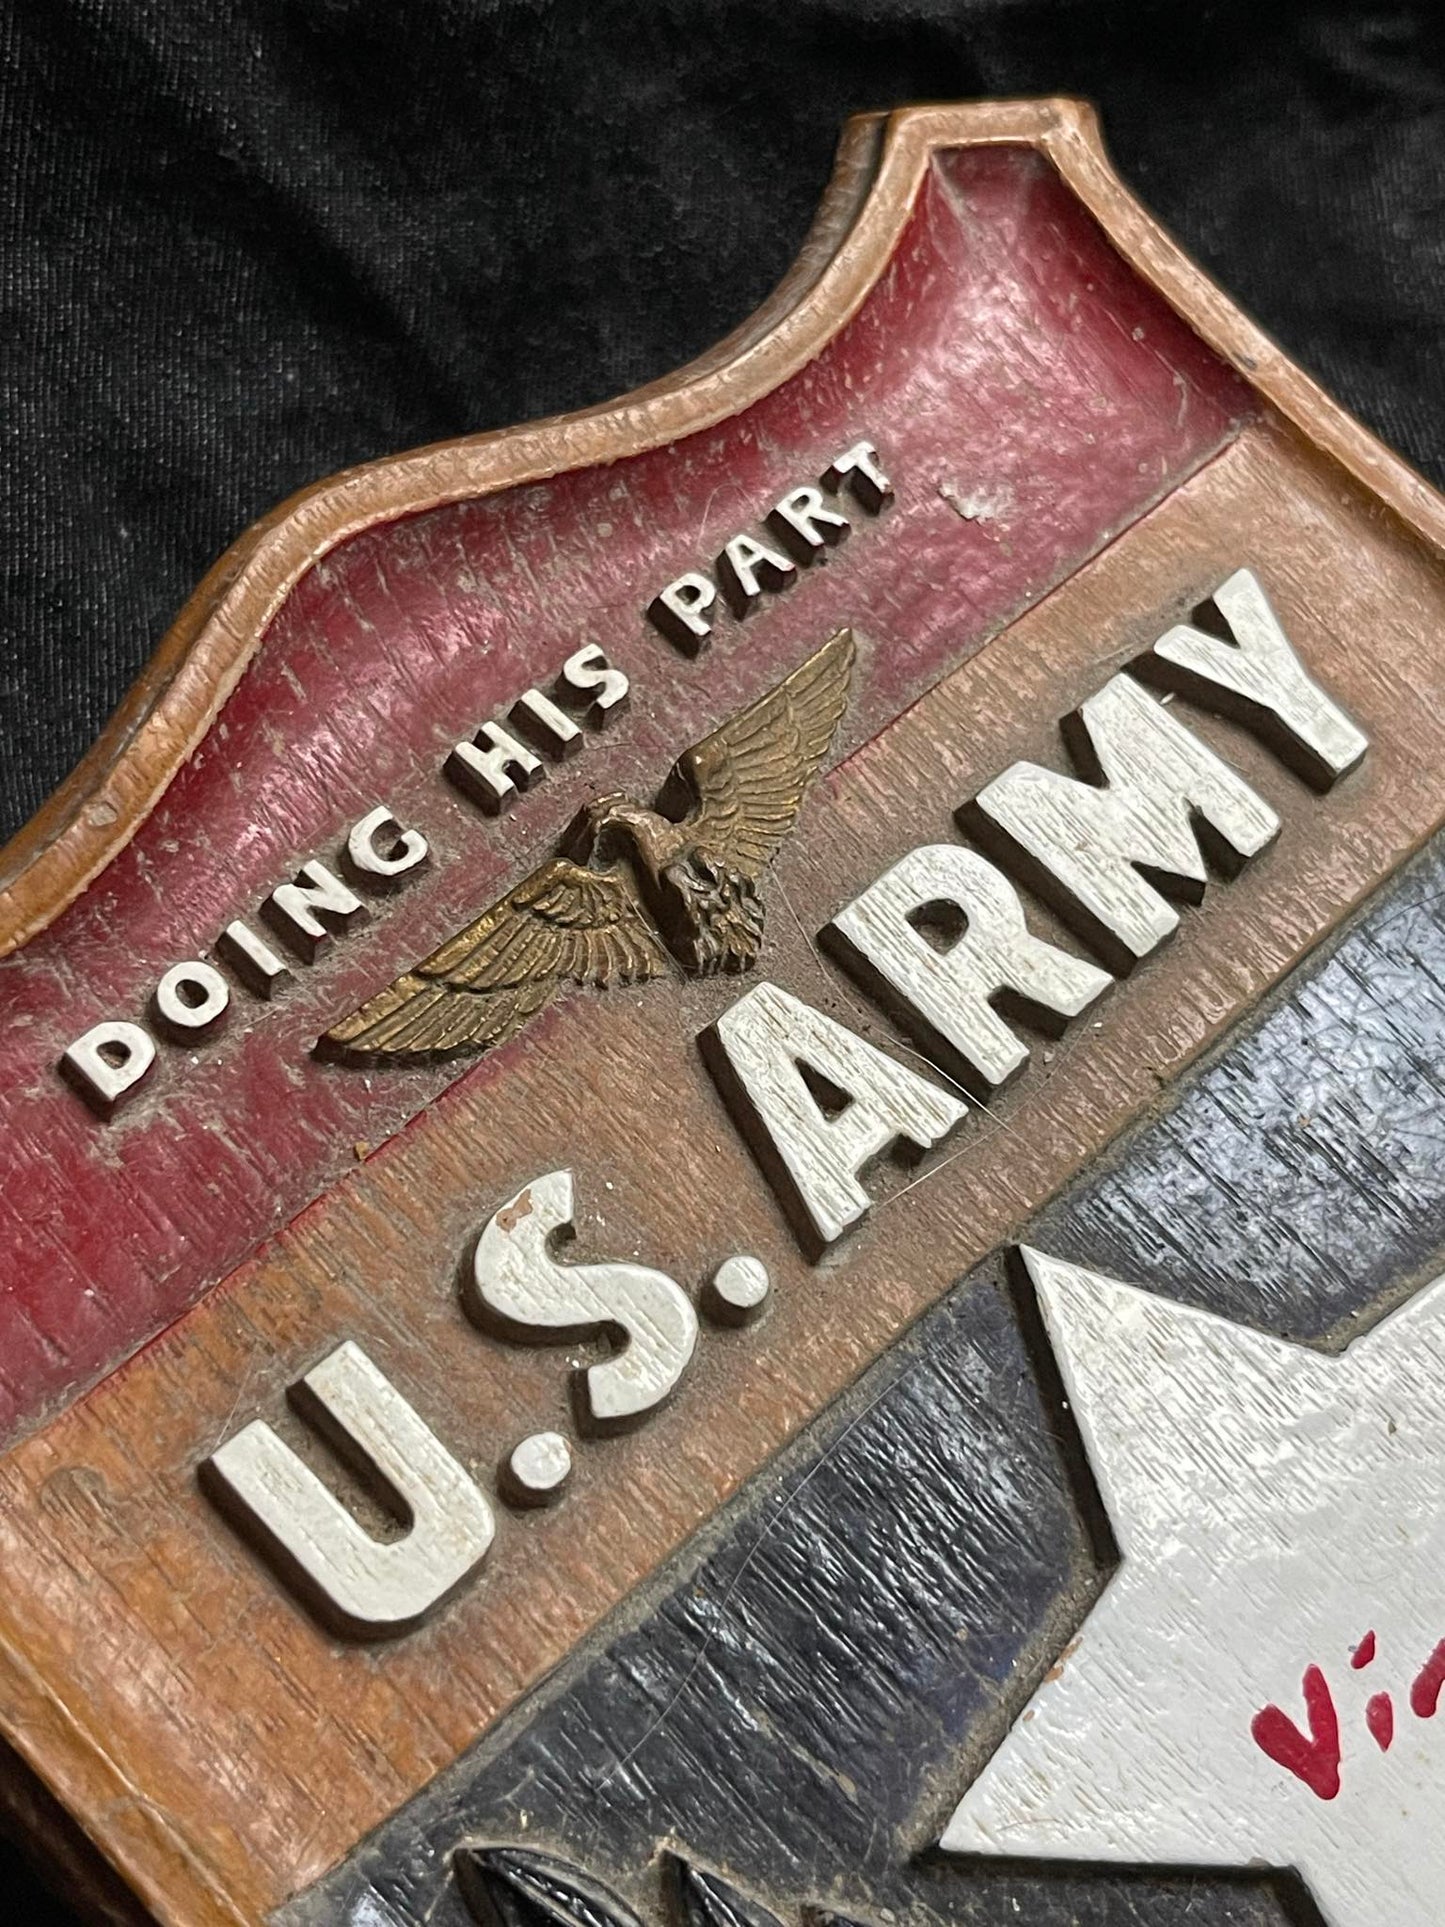 US ARMY "DOING HIS PART" WOODEN SHIELD/PLAQUE